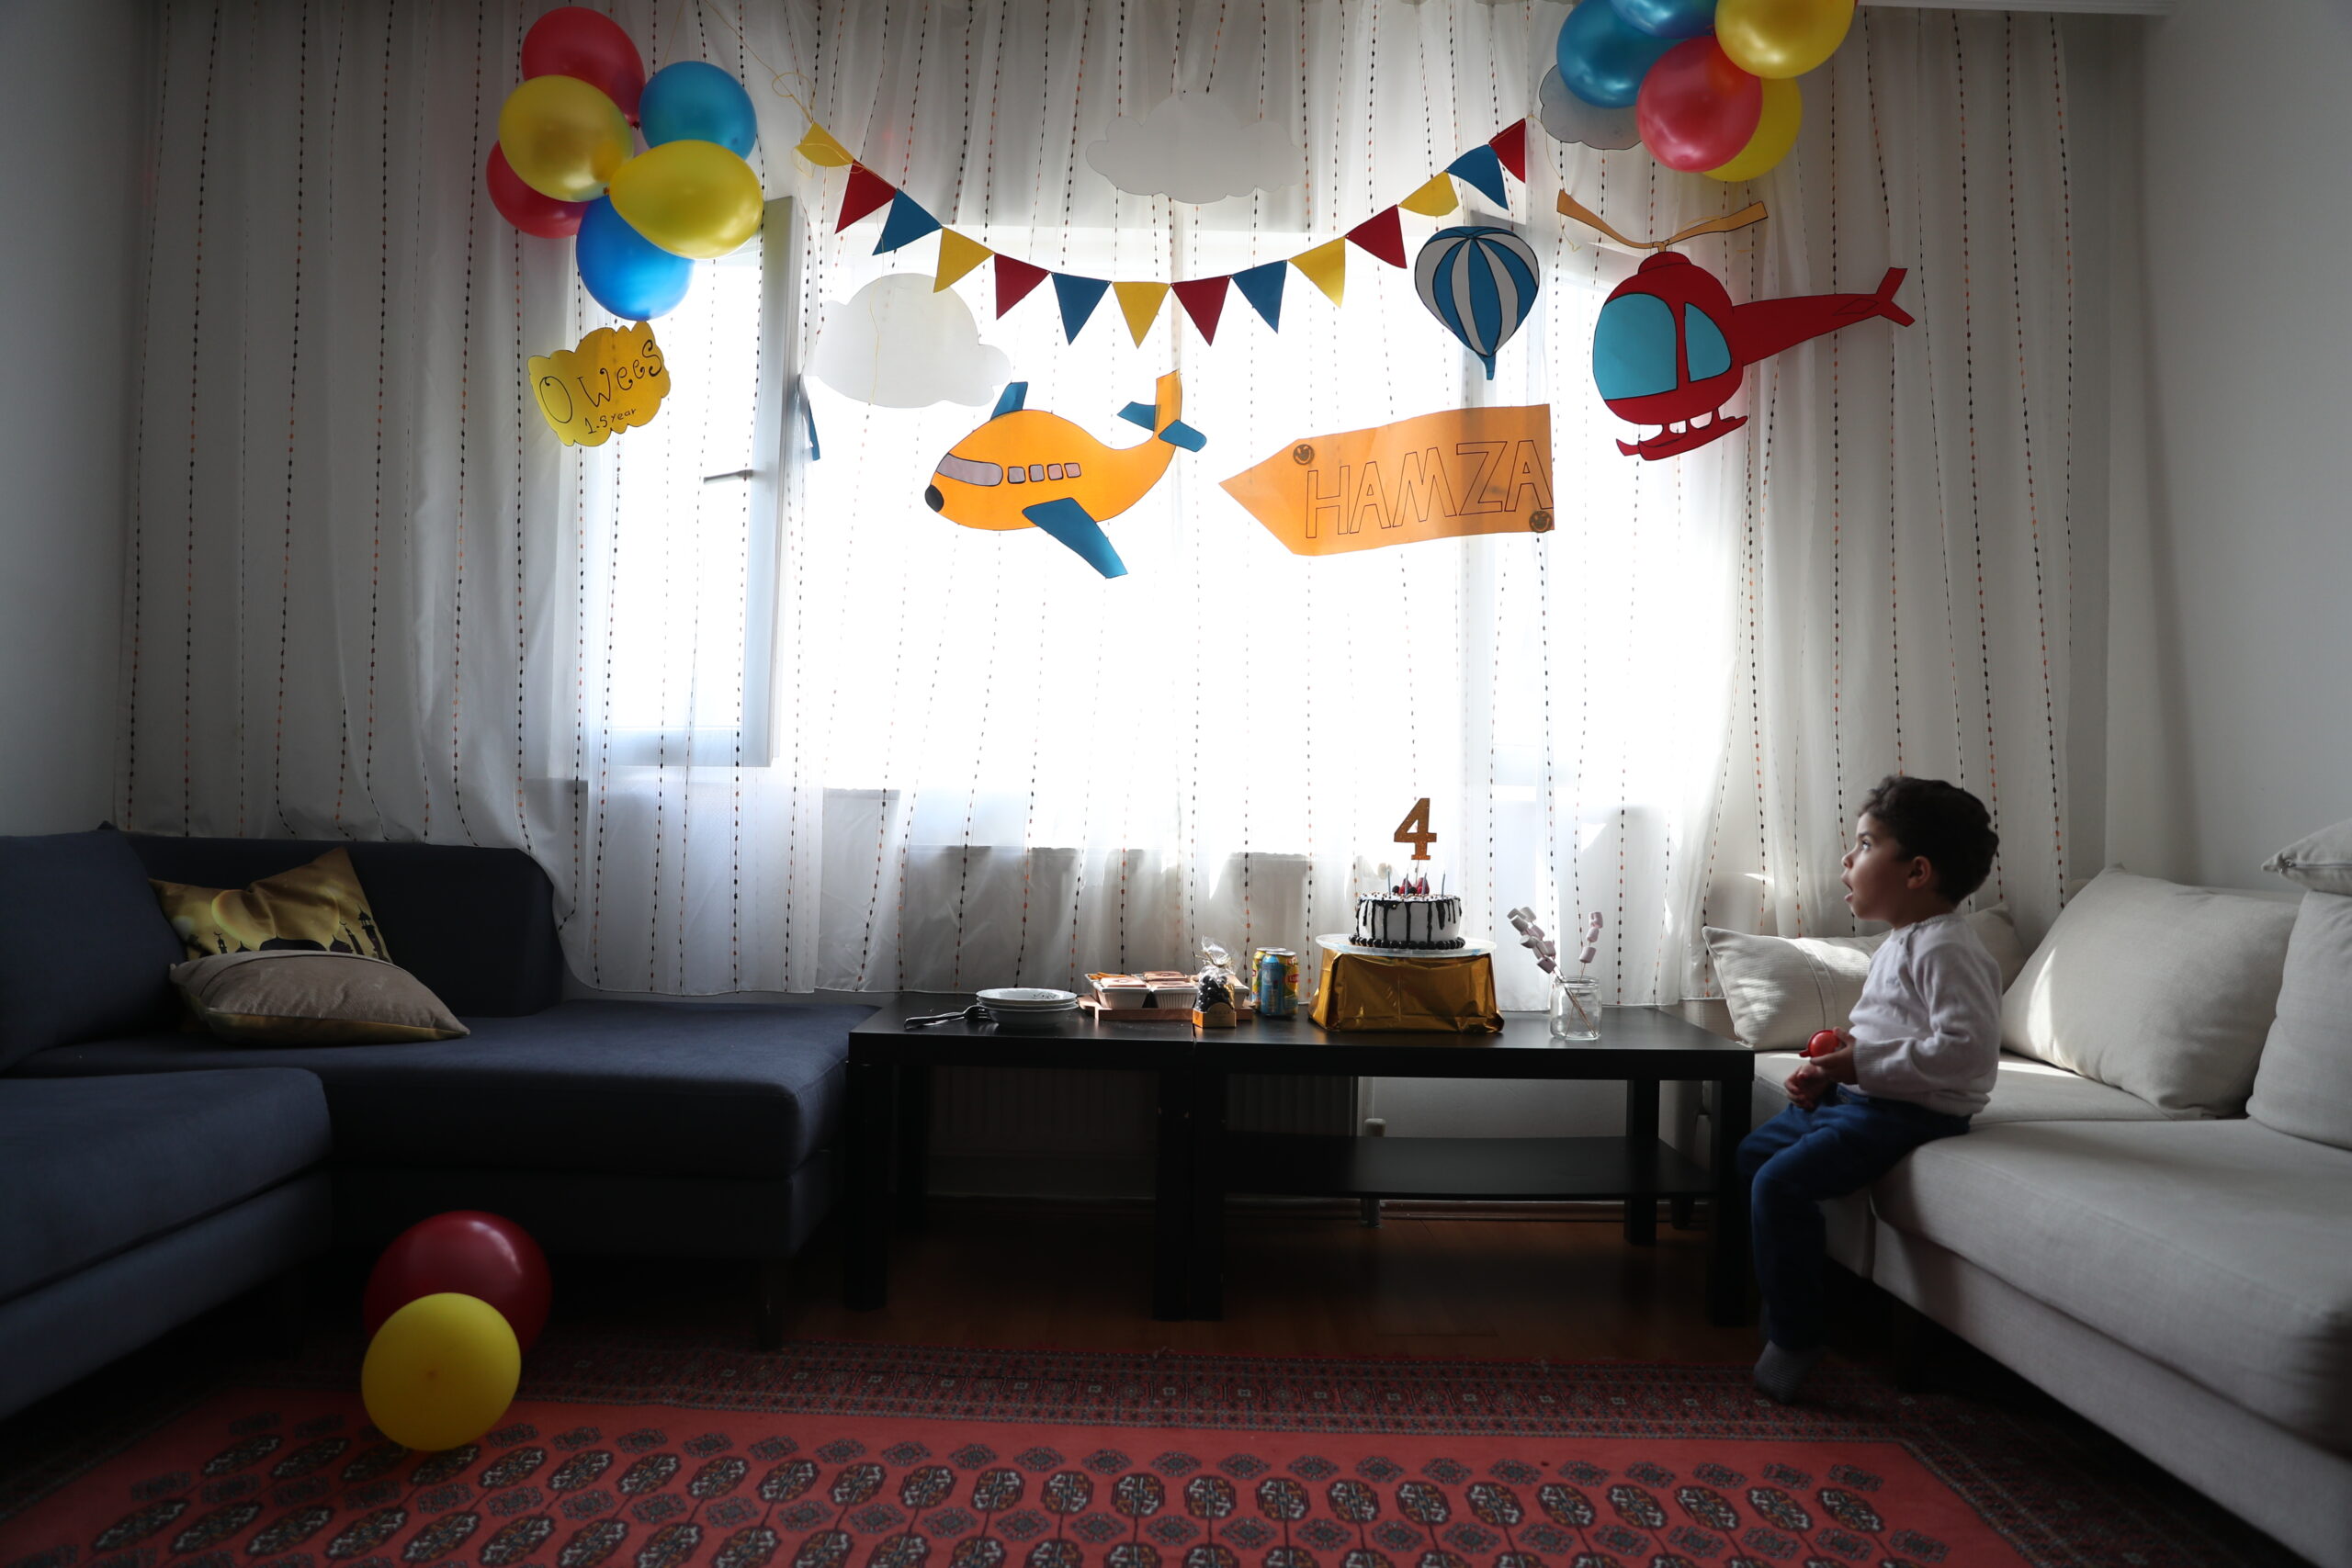 A young boys sits in a living room with decorations for a 4th birthday.